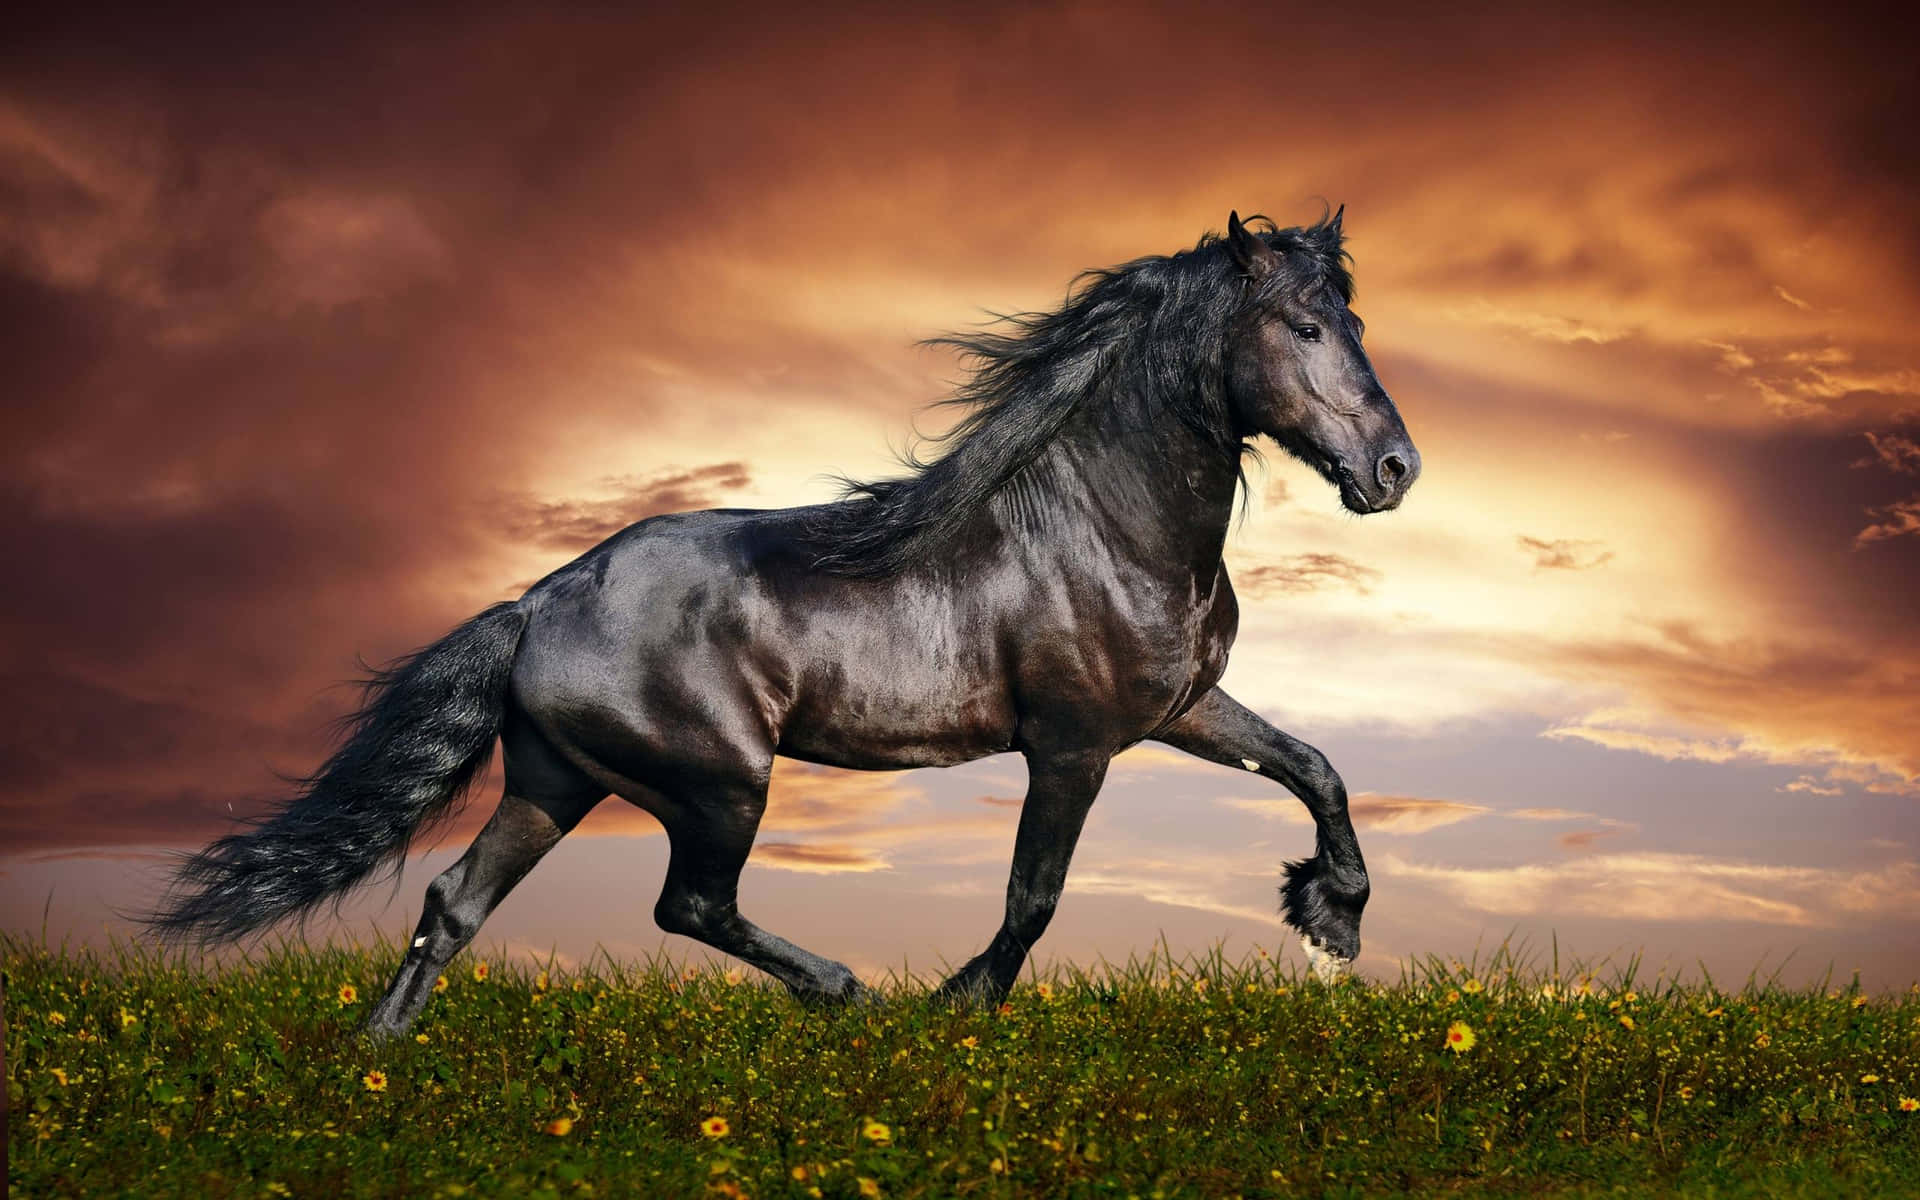 A Bold And Spirited Horse Standing Tall Surrounded By Beautiful Floral Scenery. Background